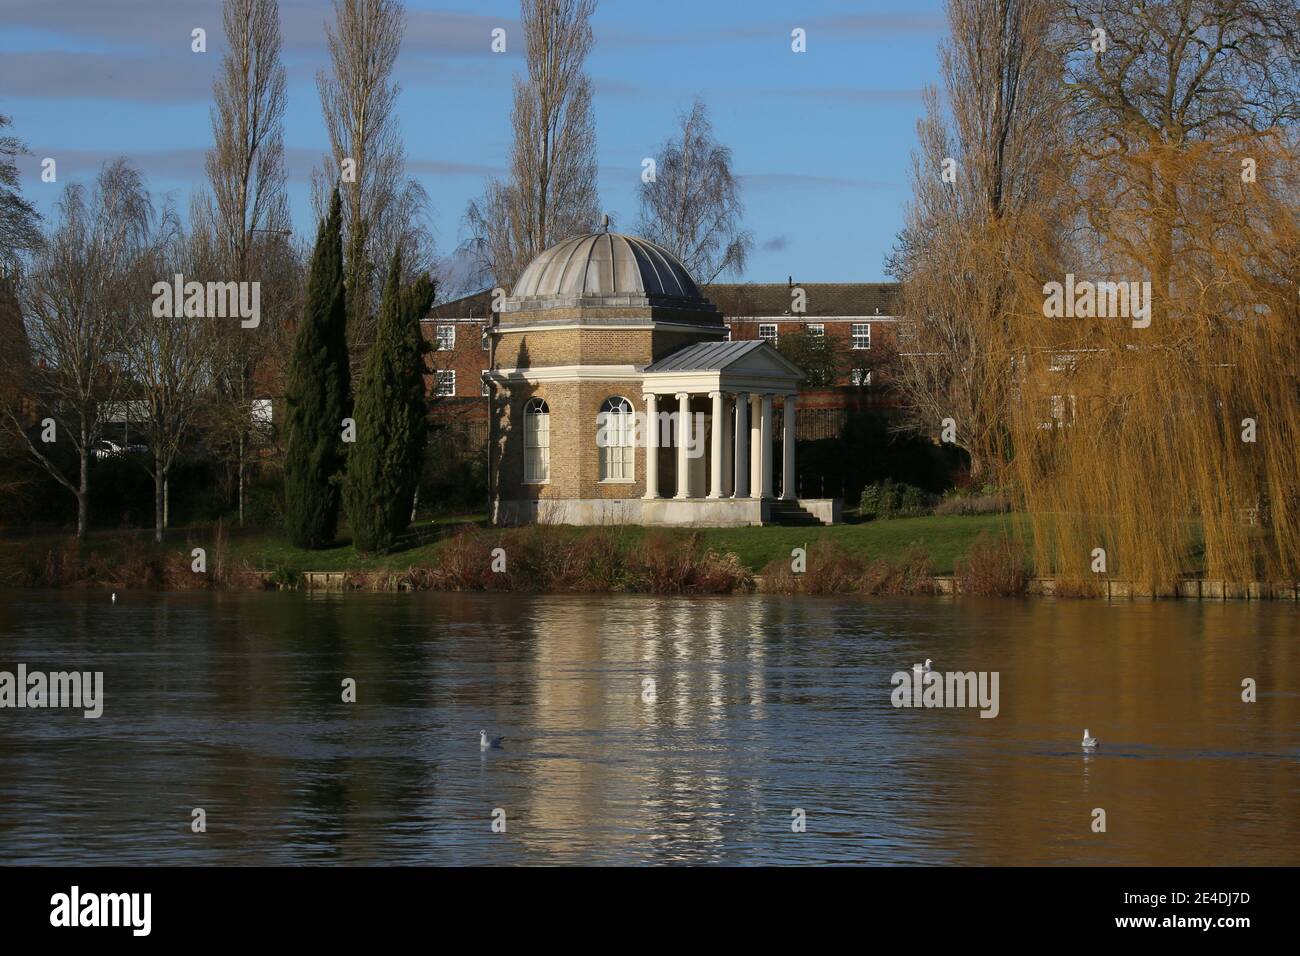 Garrick's Temple to Shakespeare, seen from Sadlers Ride, Hurst Park, East Molesey, Surrey, England, Great Britain, UK, Europe Stock Photo